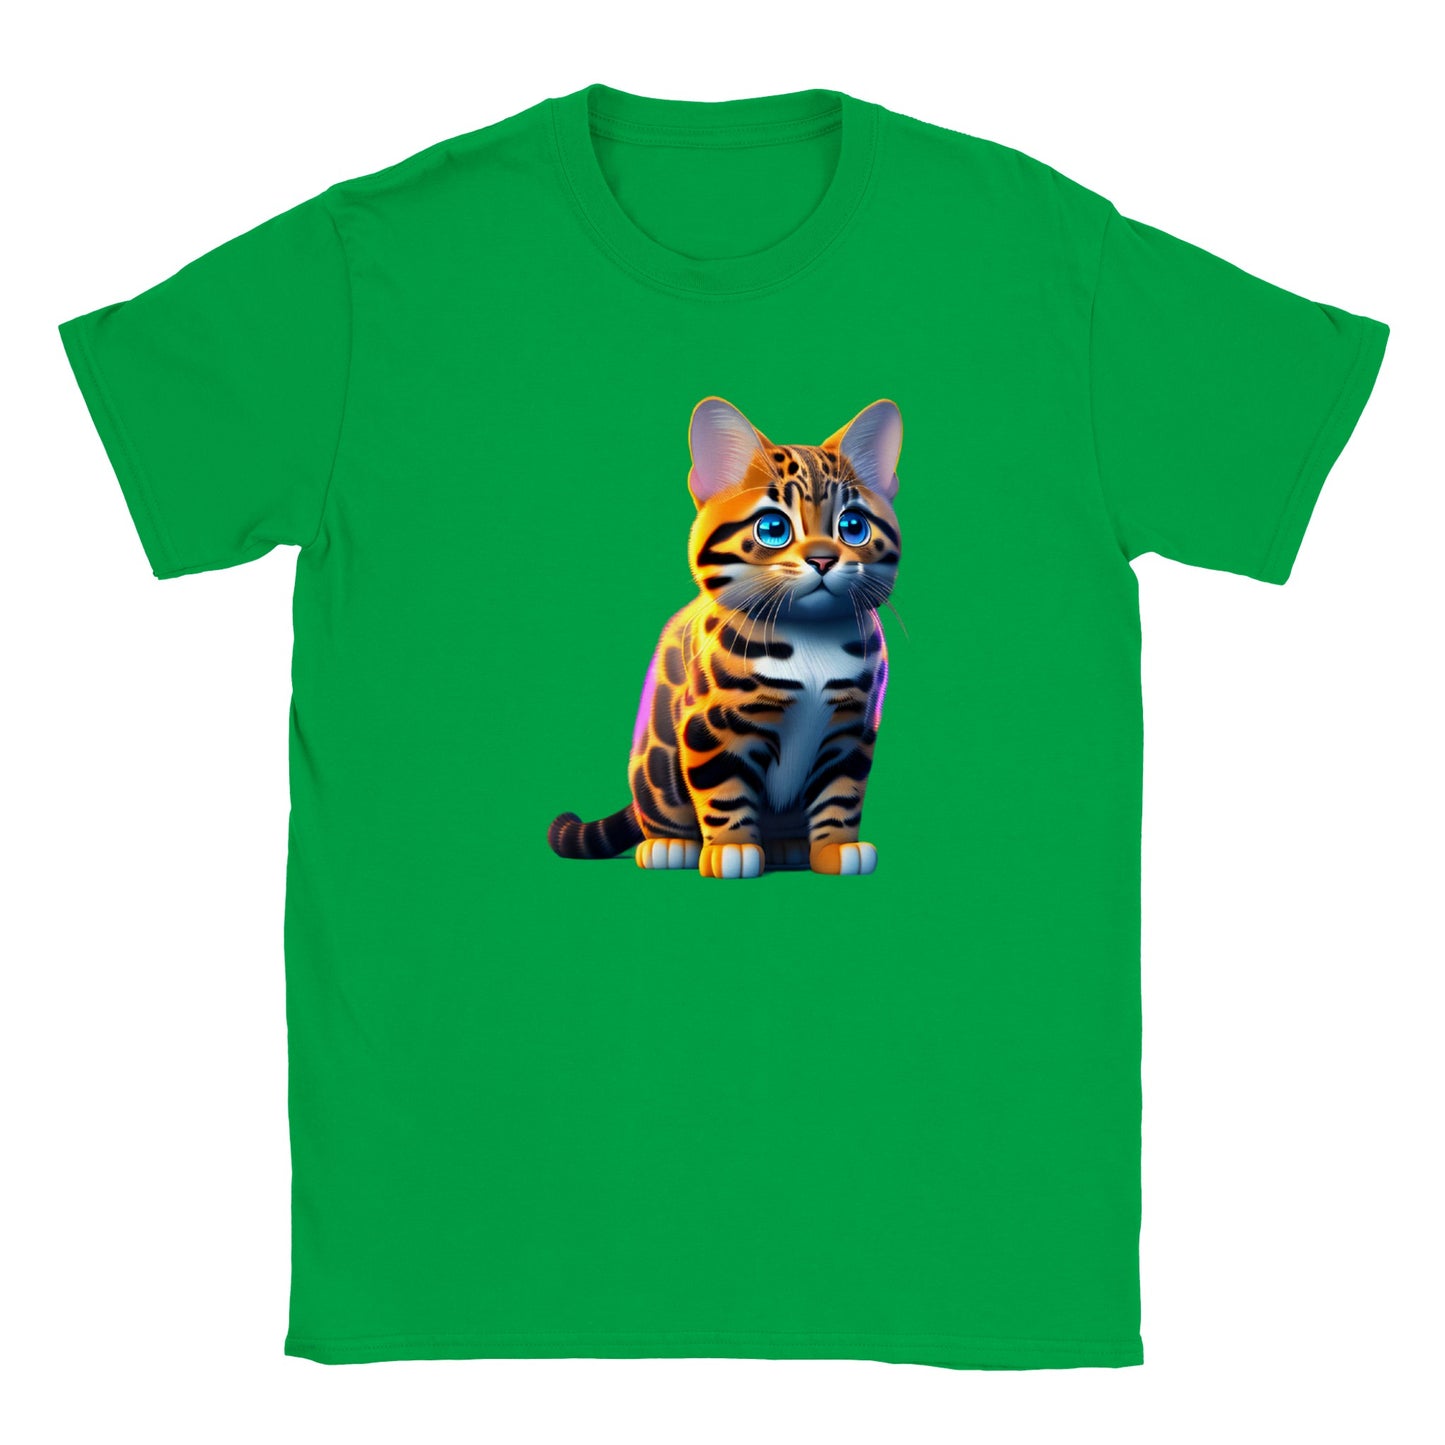 Adorable, Cool, Cute Cats and Kittens Toy - Classic Kids Crewneck T-Shirt 44